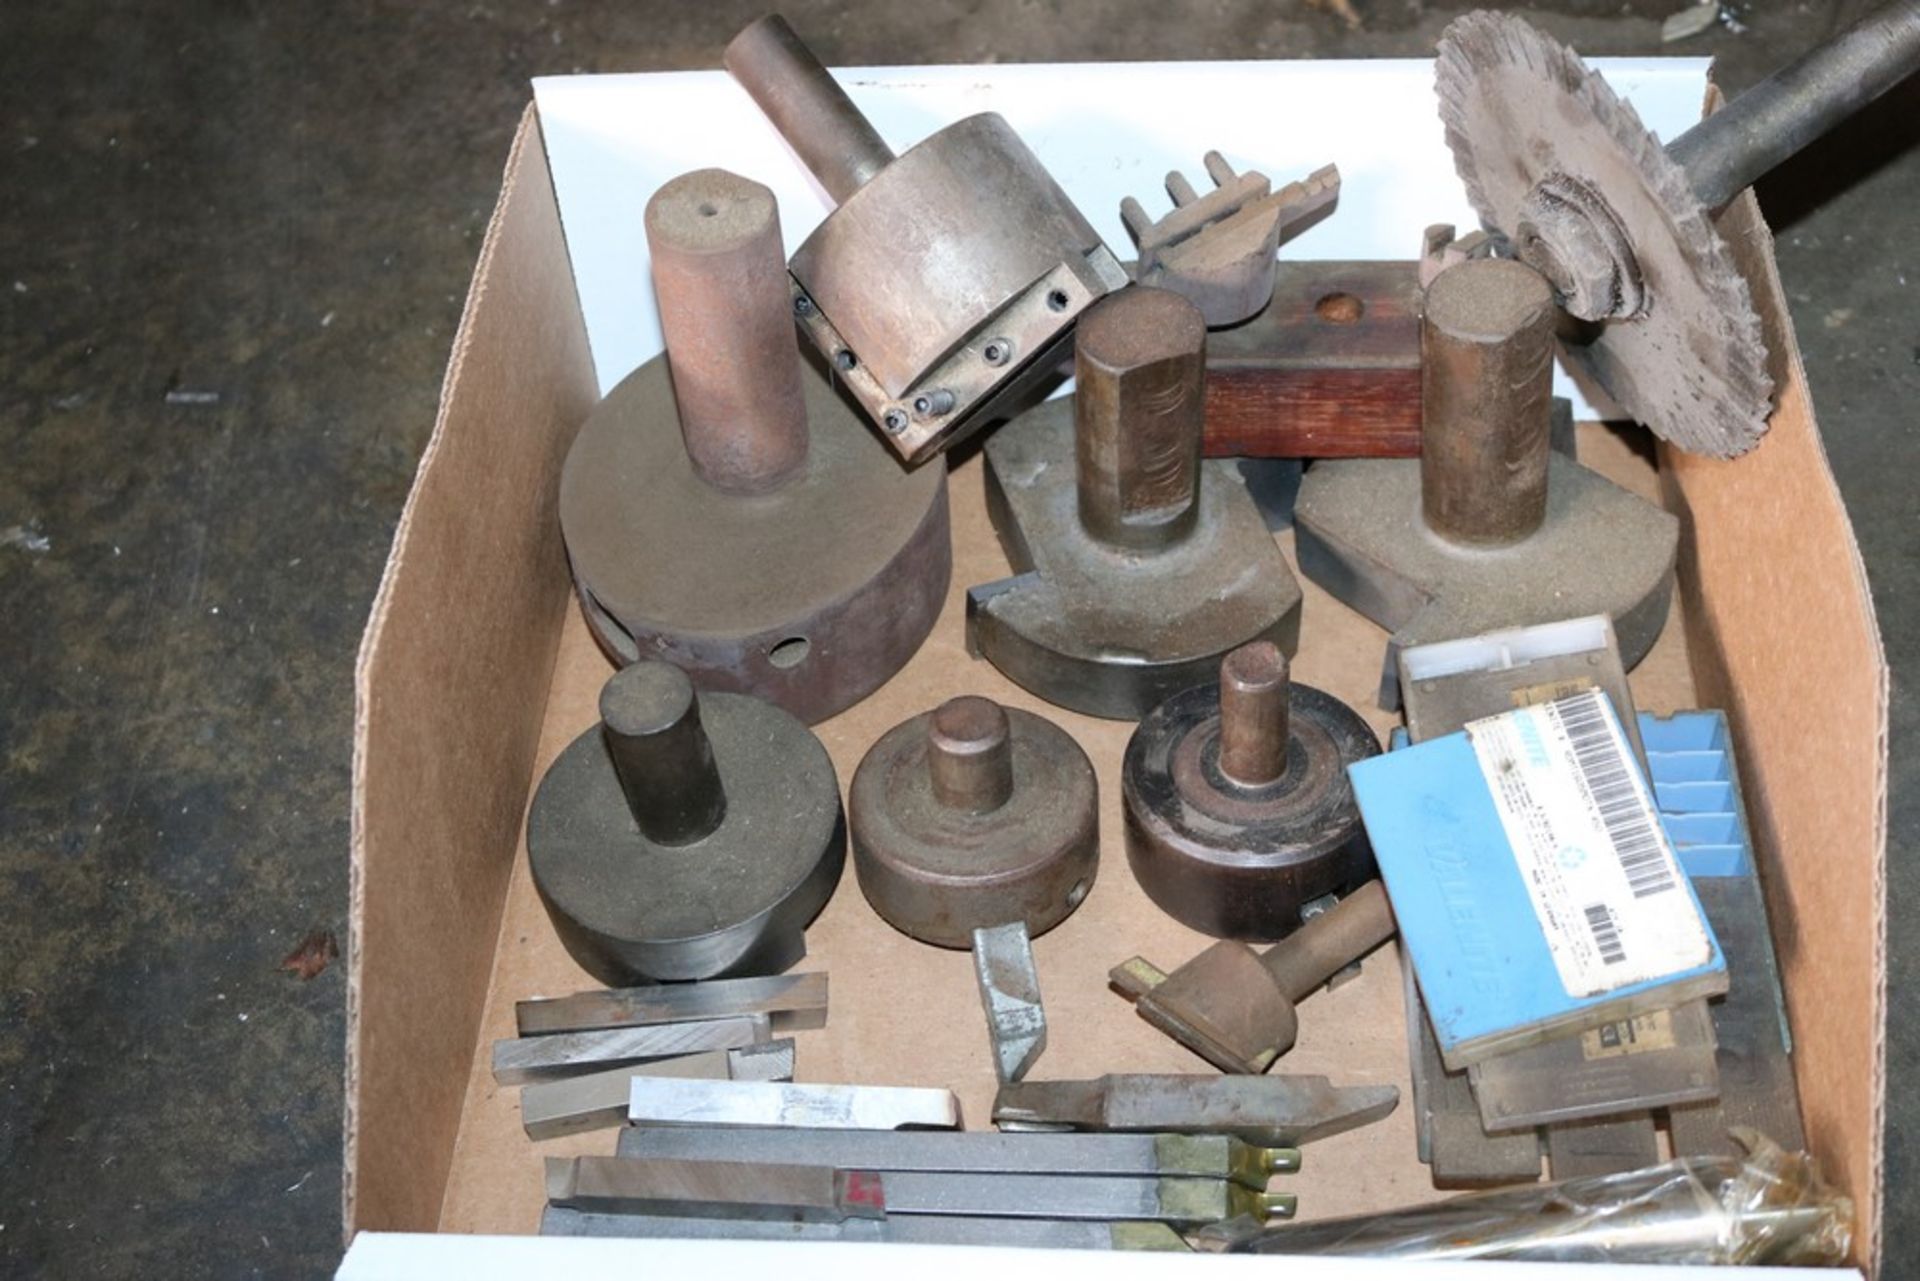 Box of Lathe Stick Tooling, OD Tooling, Lathe Inserts and Tailstock Dead Center